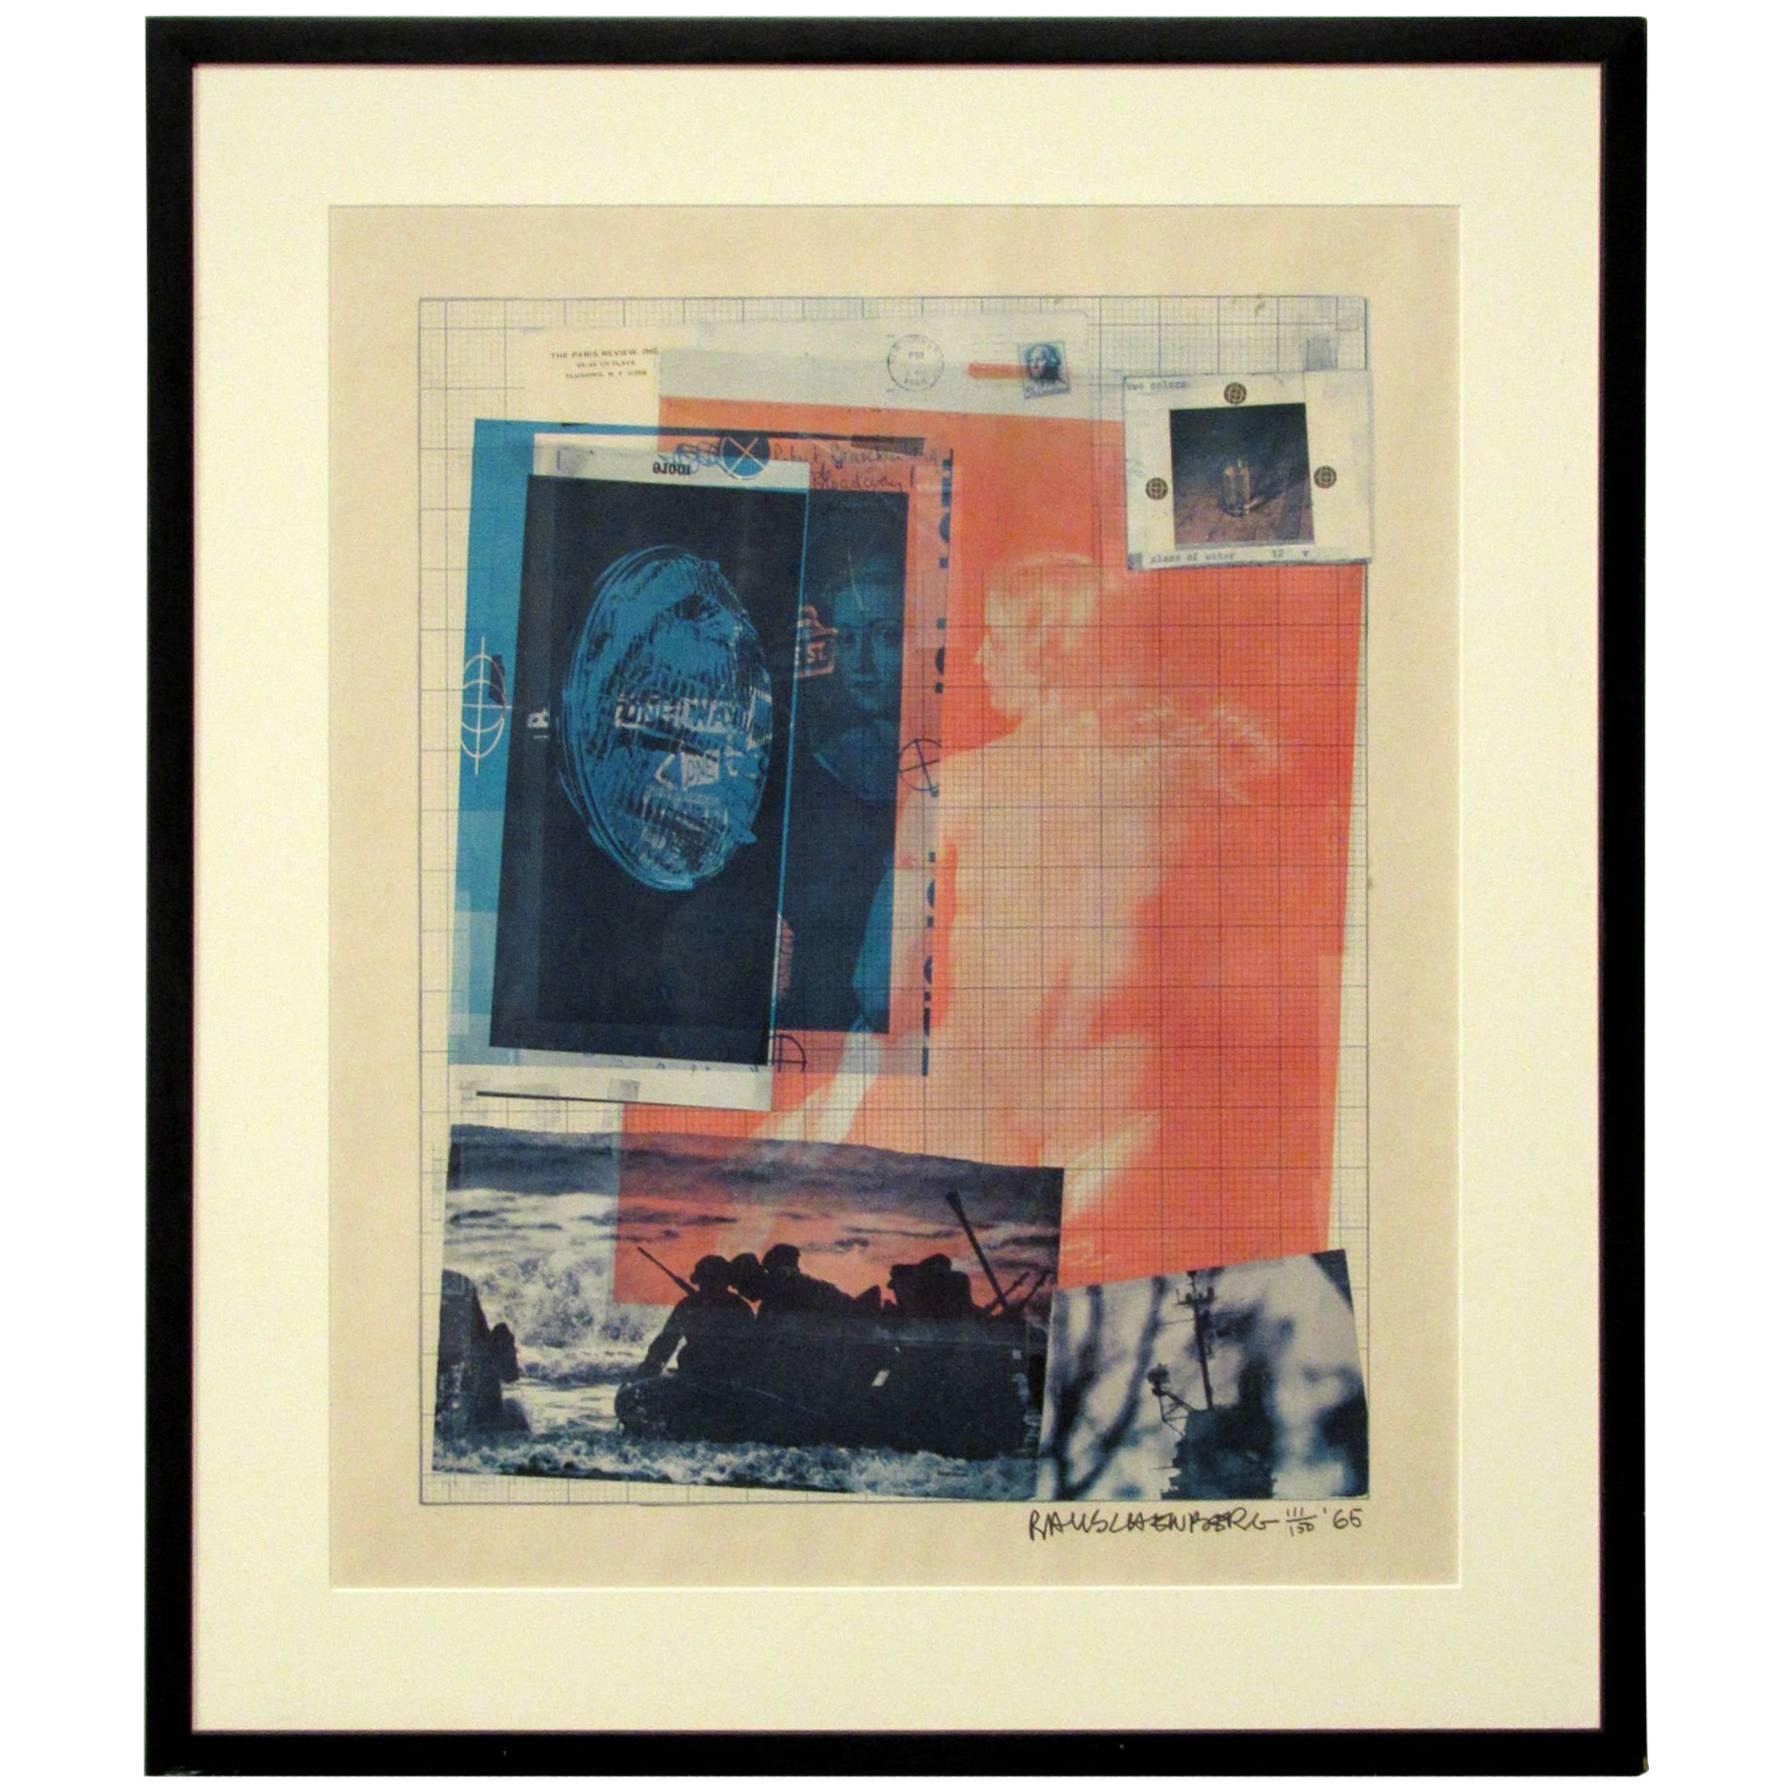 Robert Rauschenberg Paris Review Lithograph, Signed/Numbered, 1965